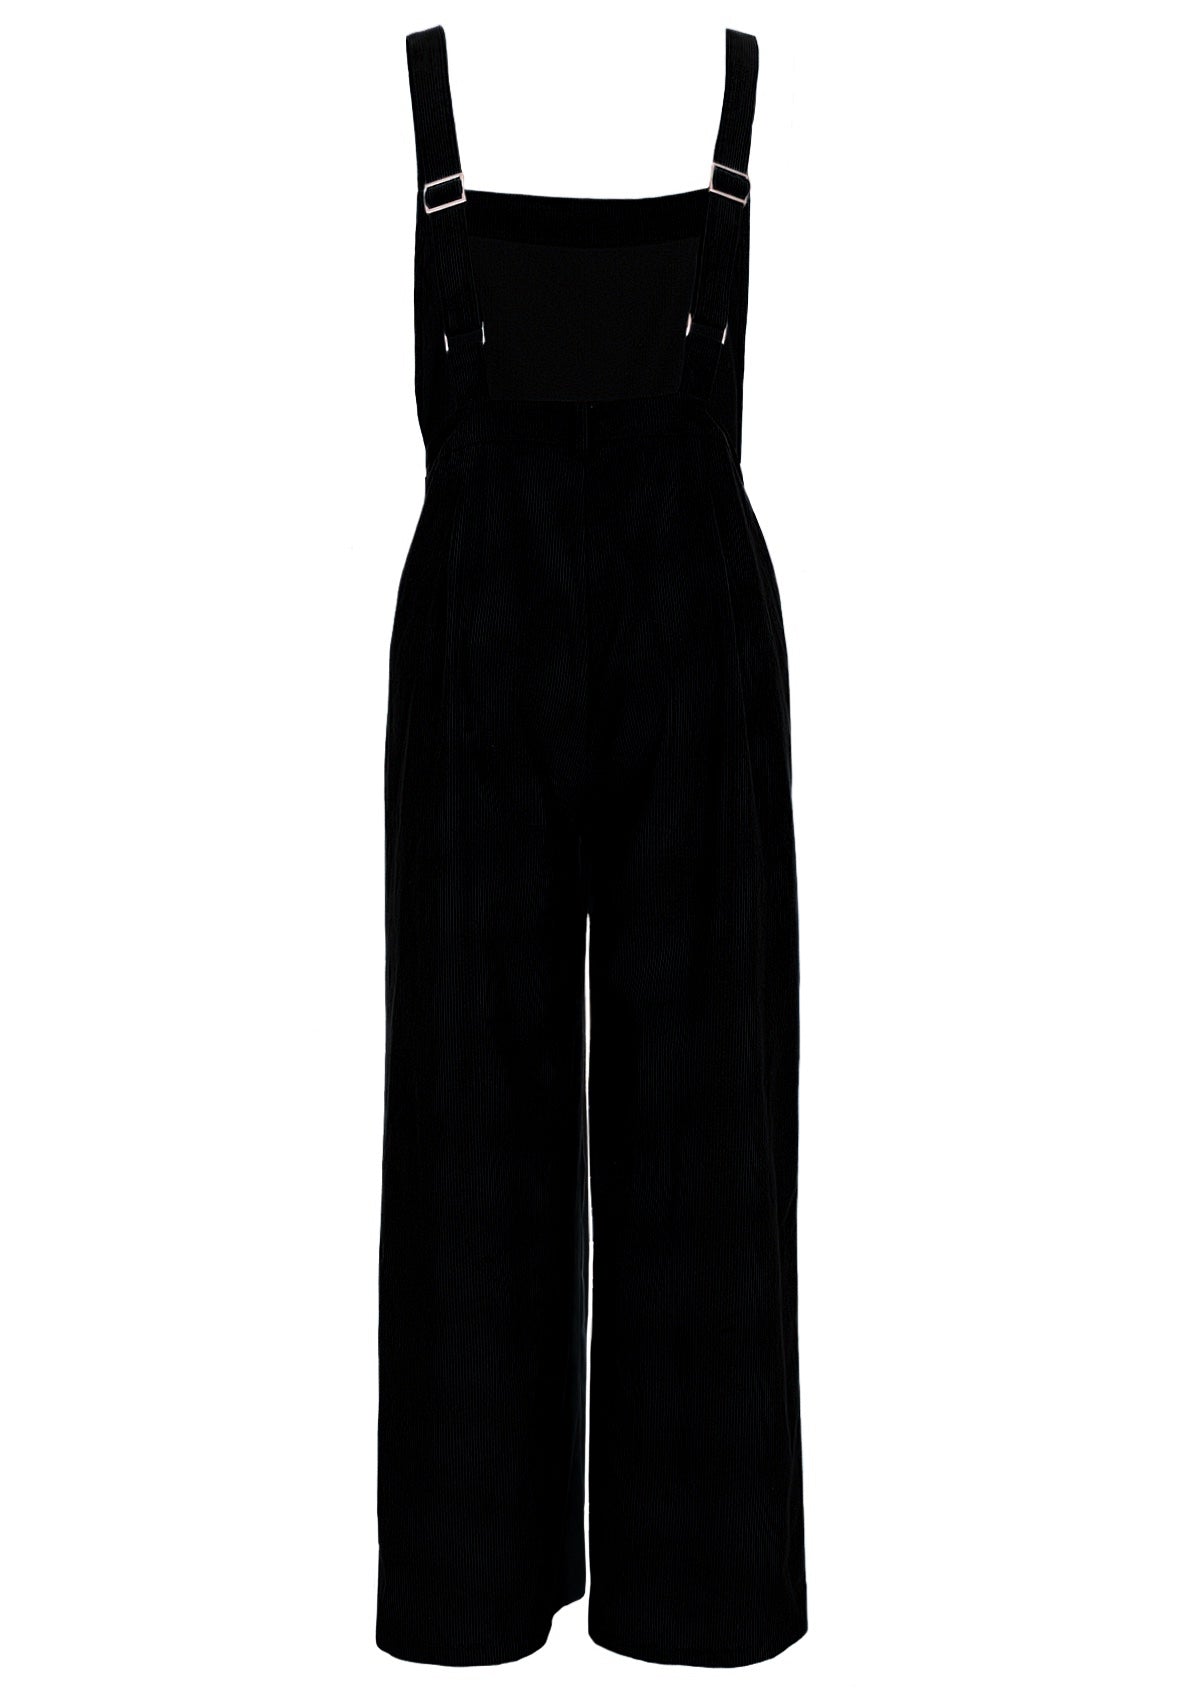 back view of black cotton corduroy overalls